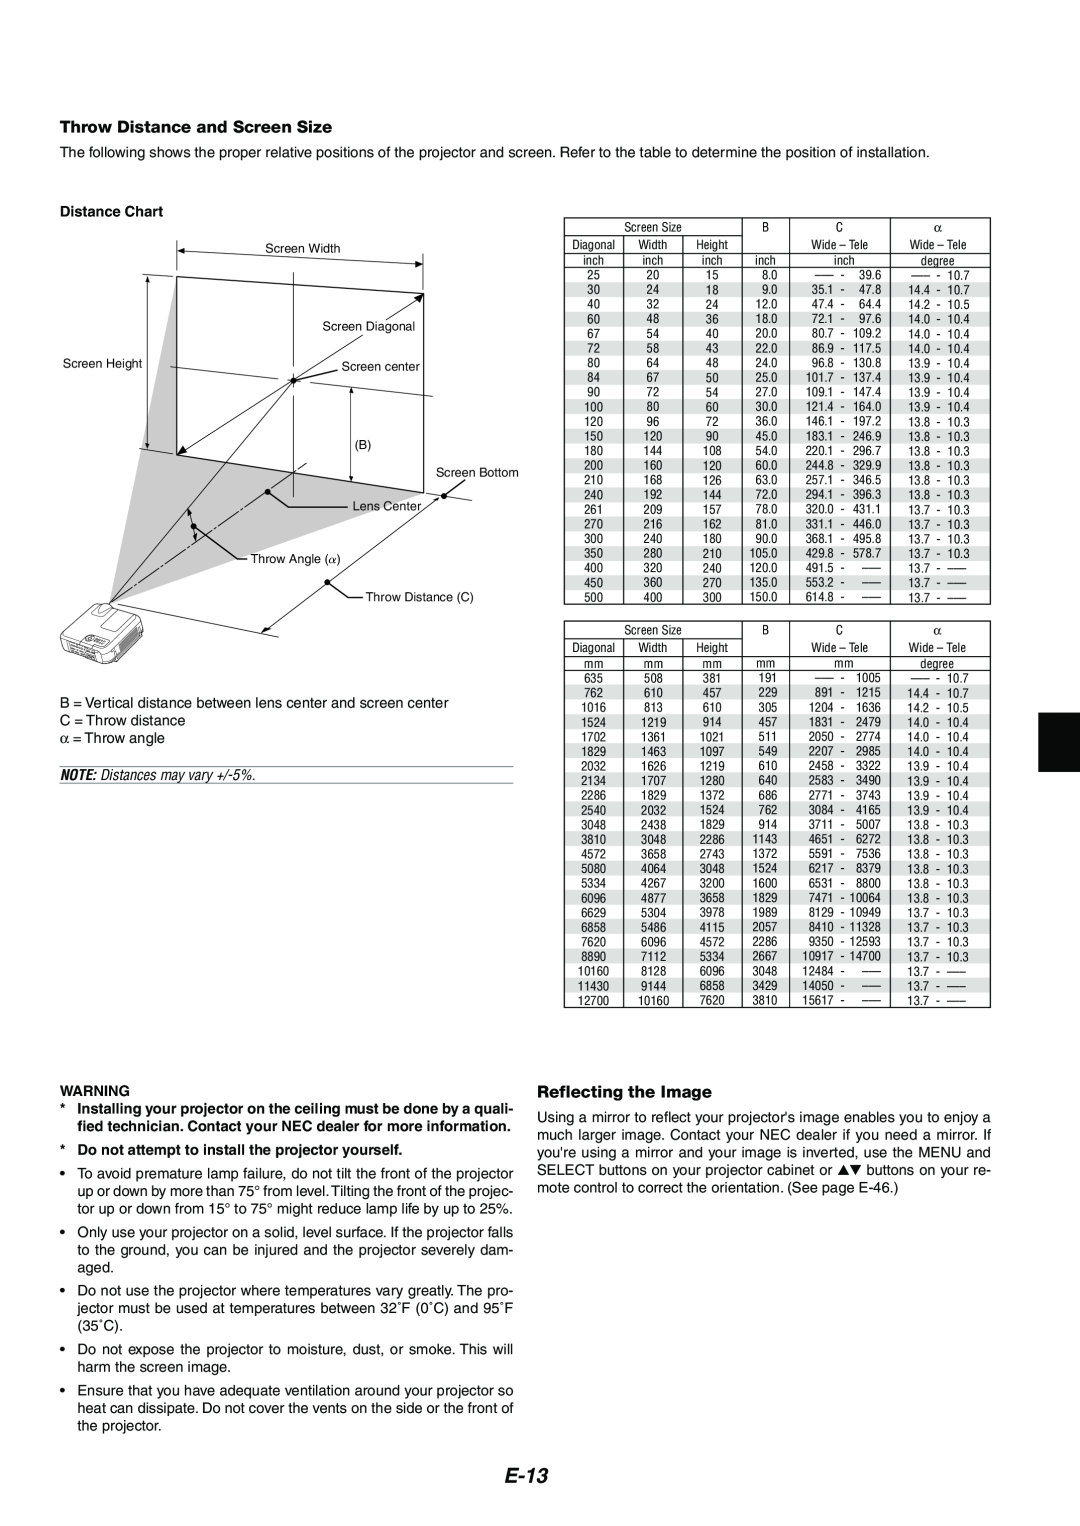 Kensington MT1065, MT1075 user manual E-13, Throw Distance and Screen Size, Reflecting the Image, Distance Chart 